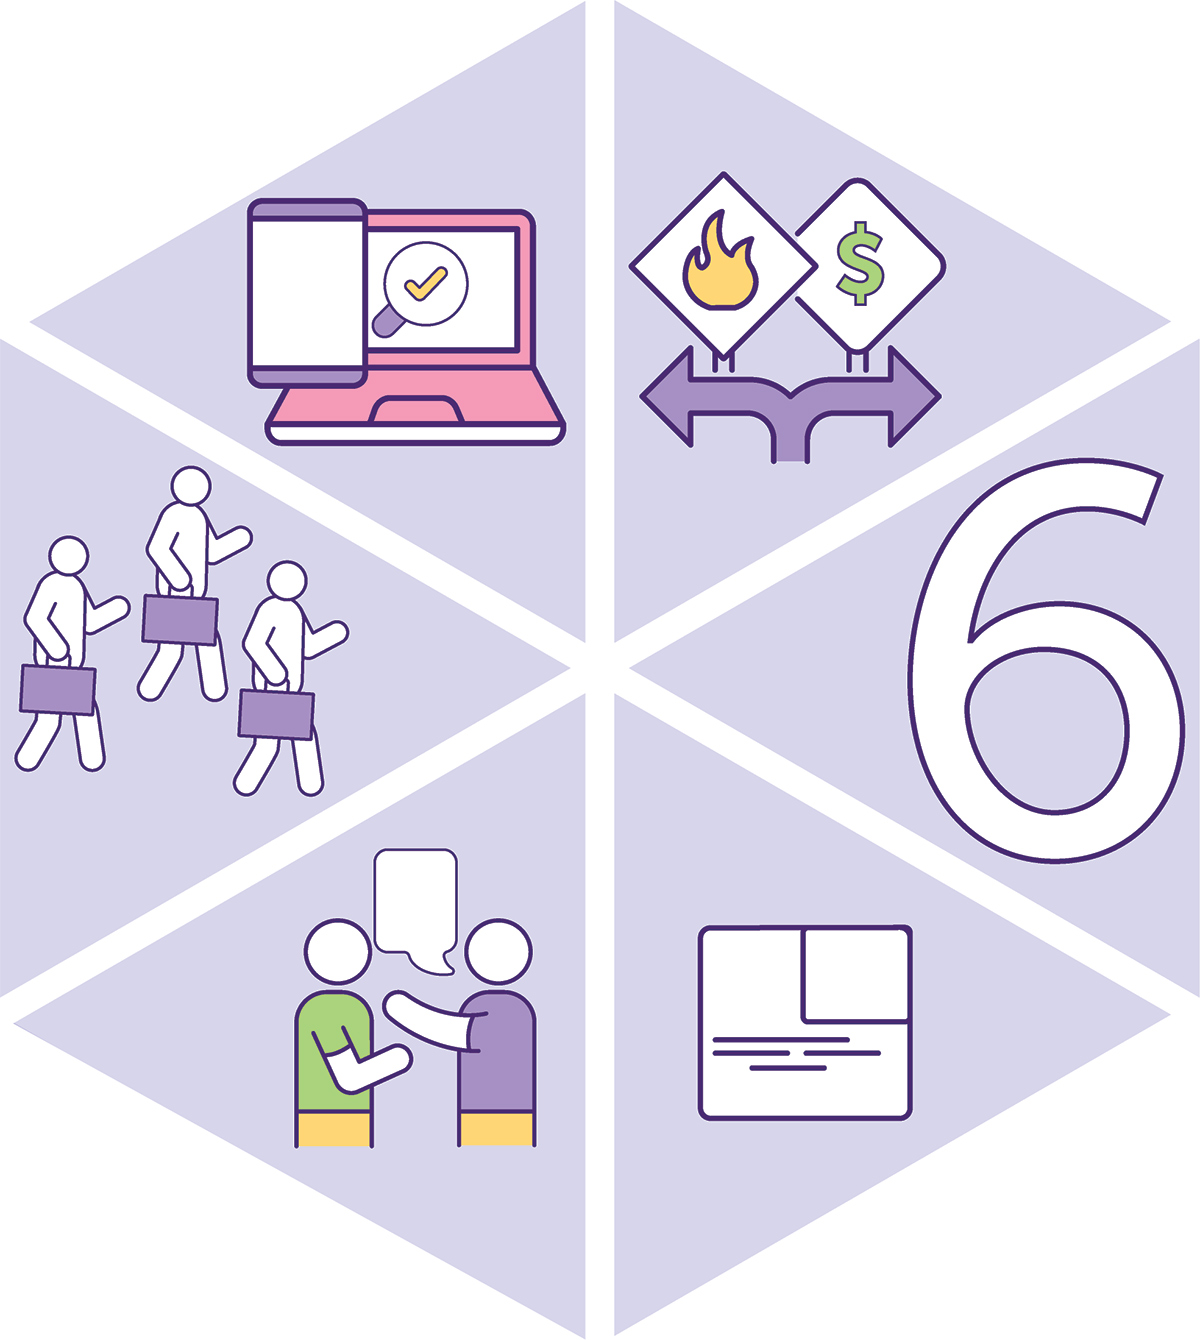 number 6 with business illustrations in triangle shapes